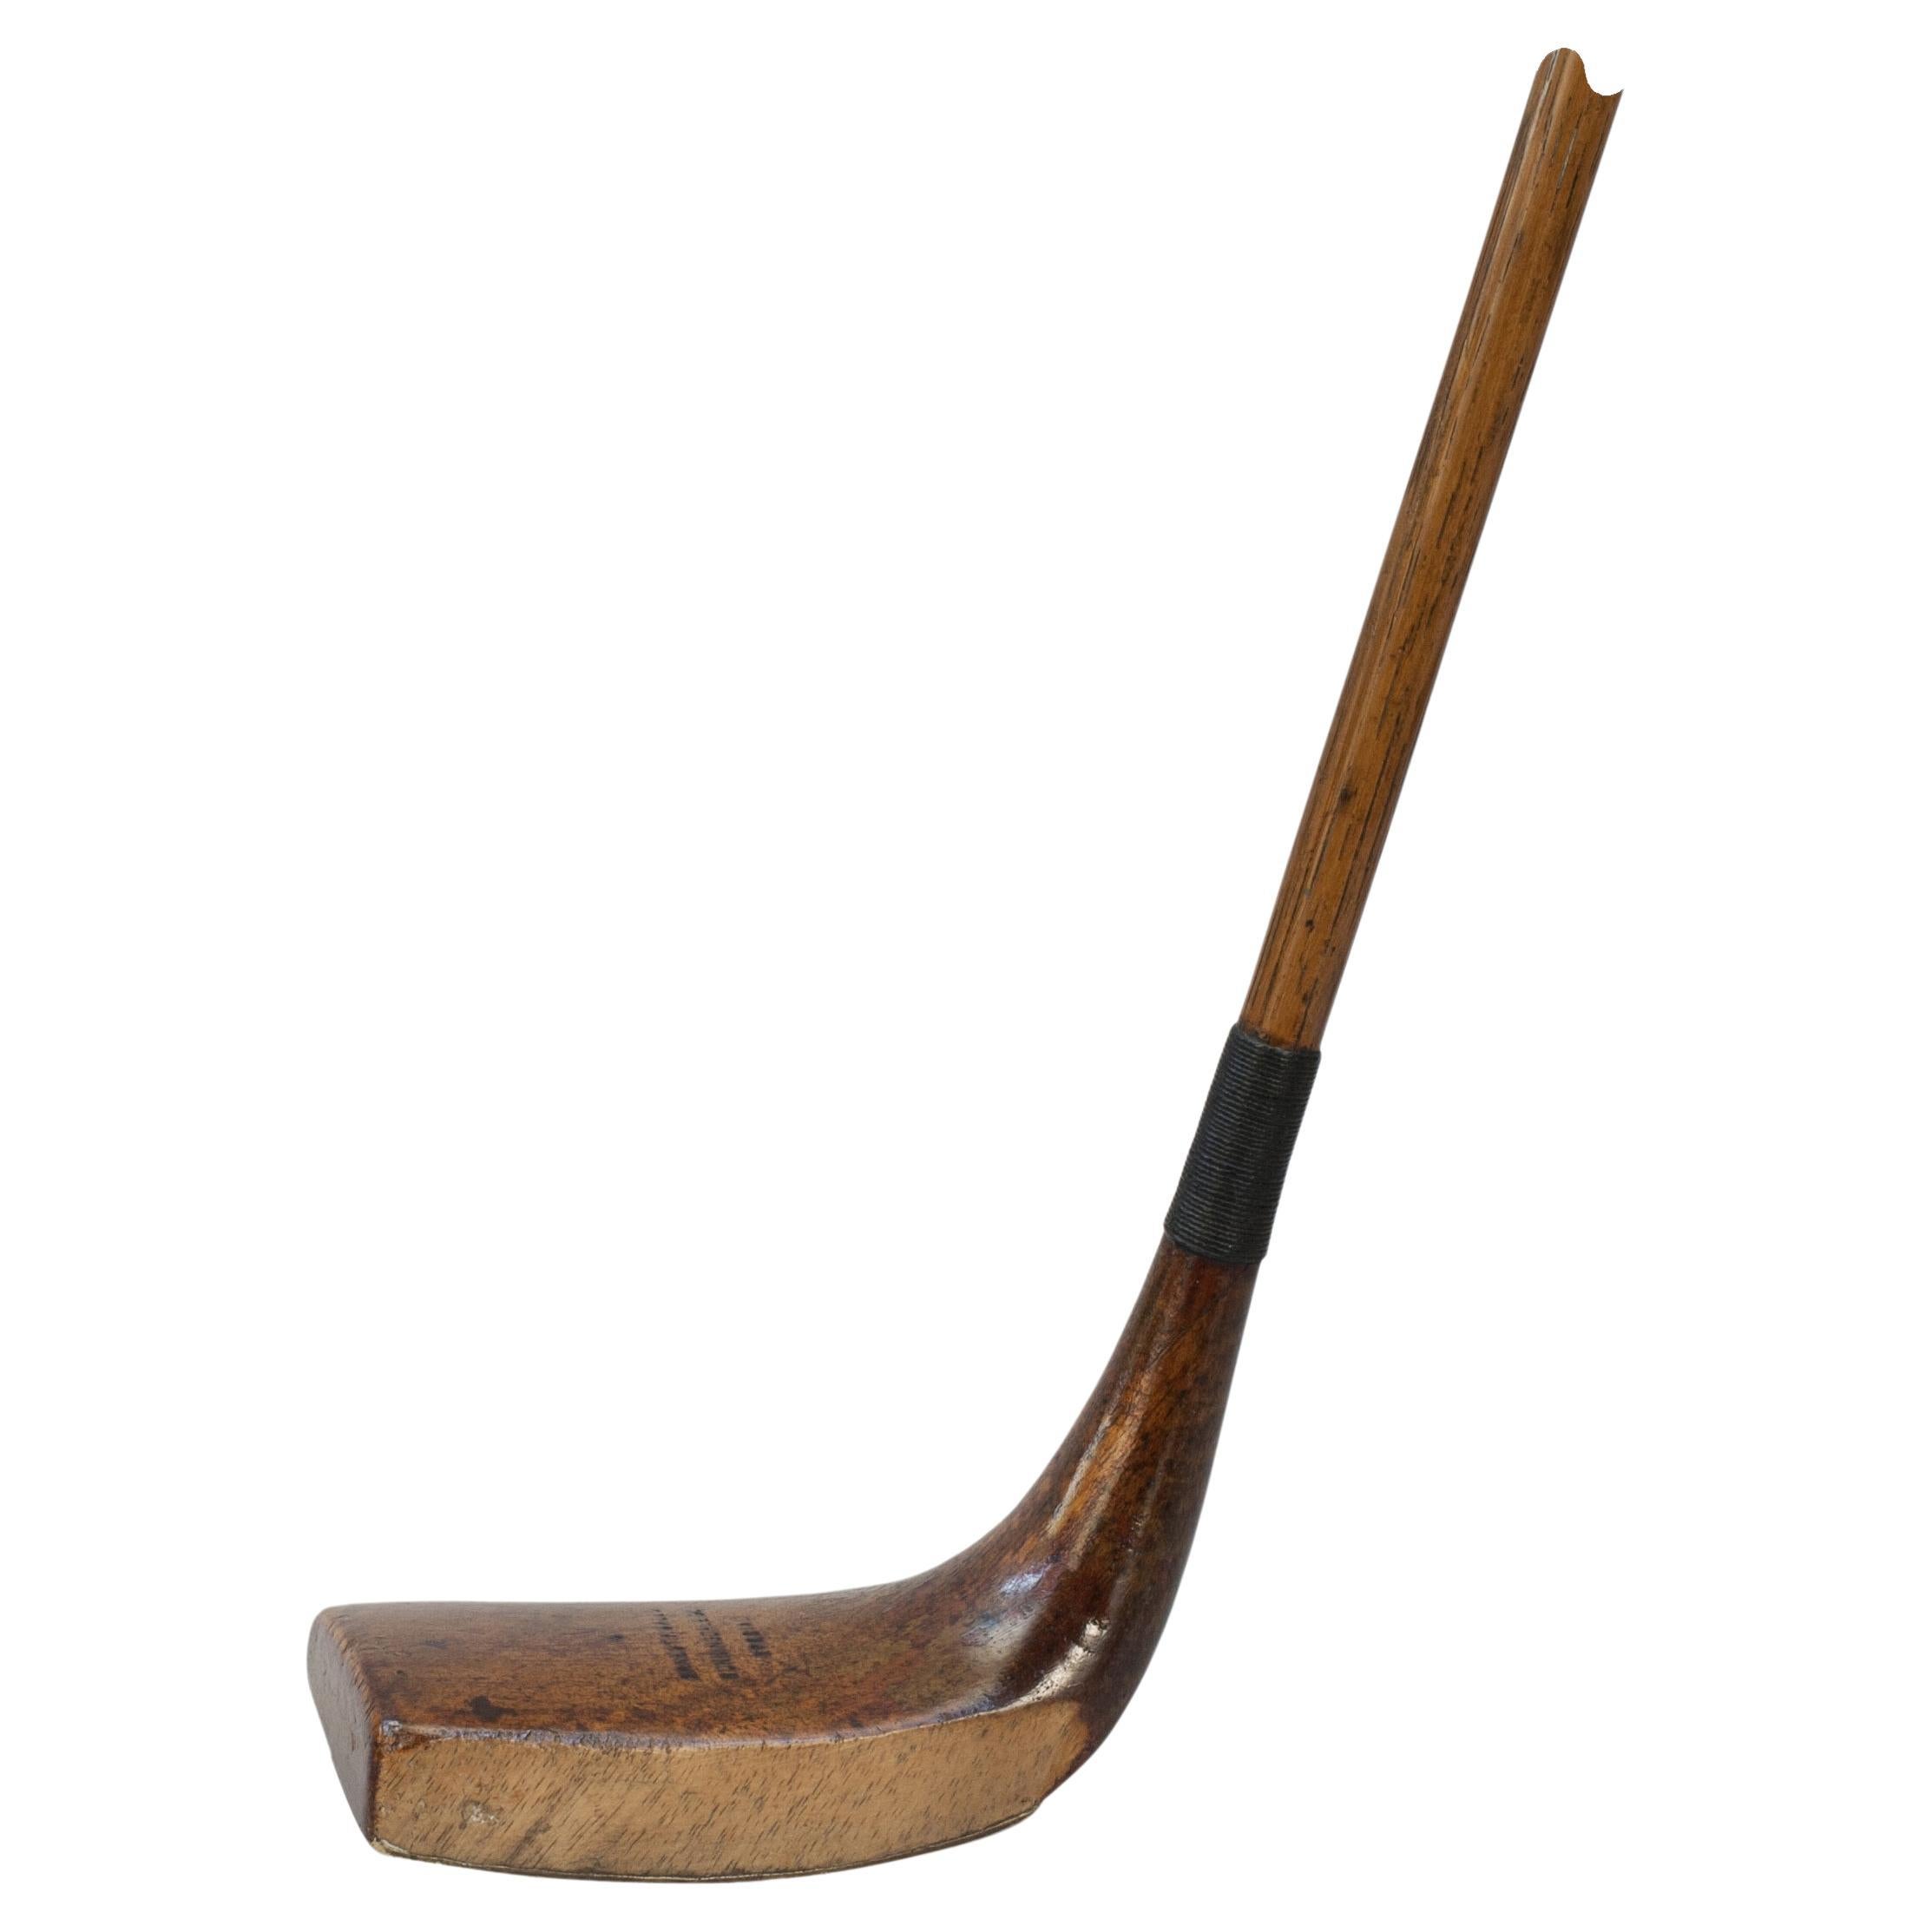 Golf Club, Gassiat Type Putter by Ernest F. Sales of Sunningdale